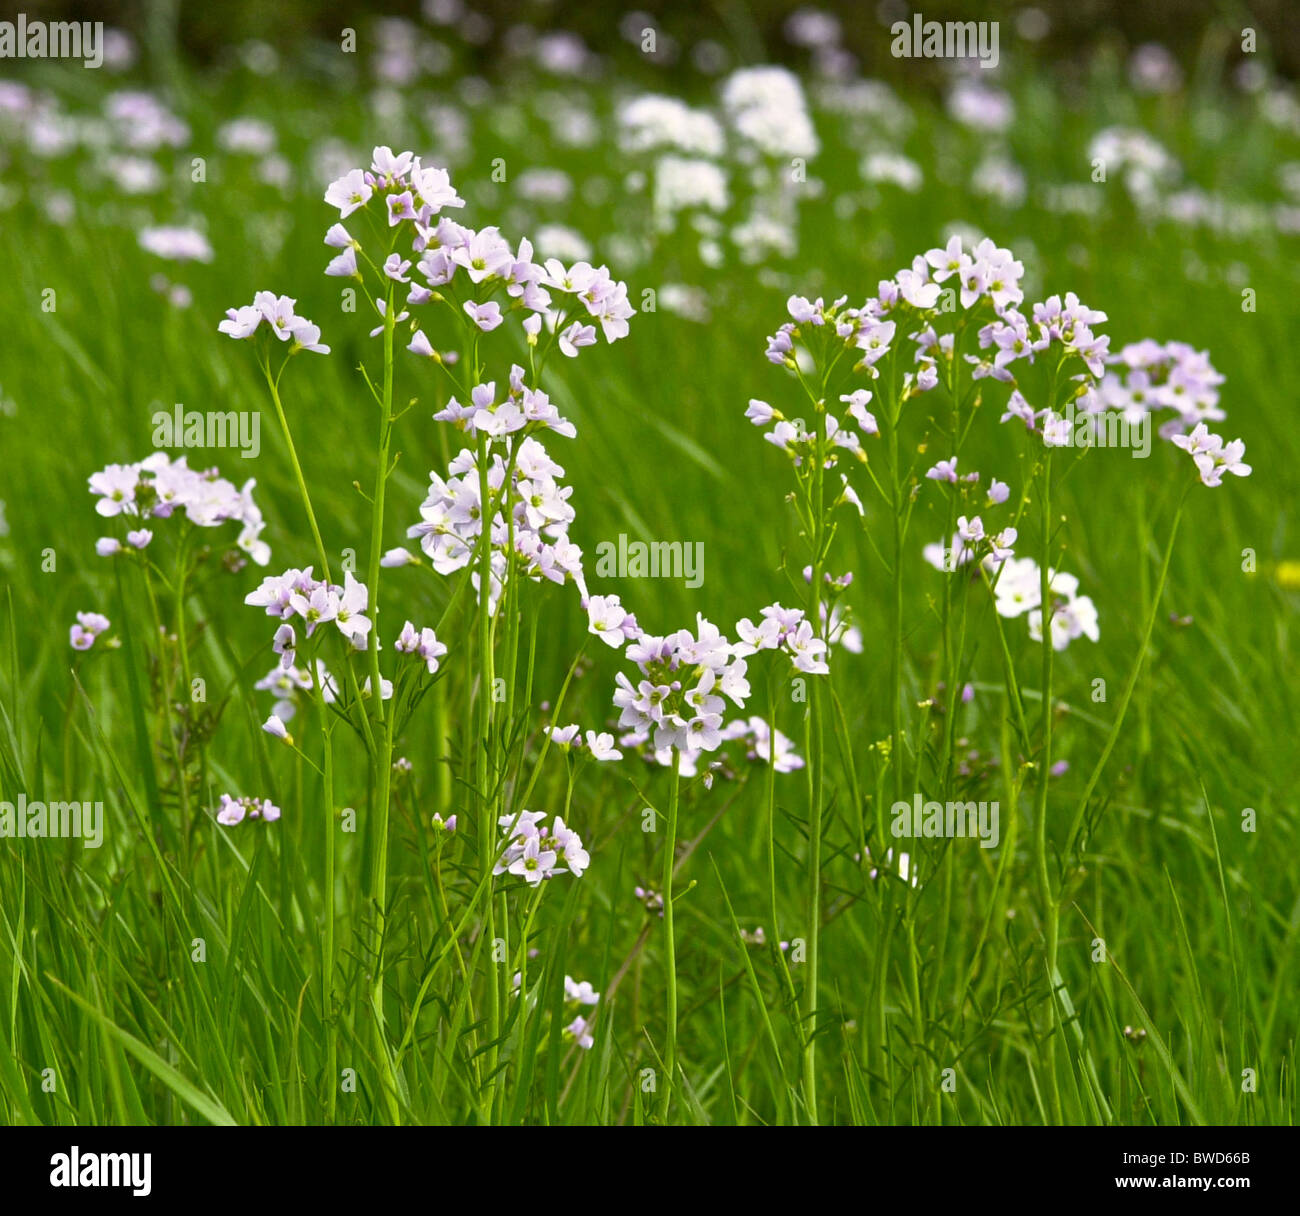 Milkmaid, Lady's Smock, CuckooFlower, are various names for Cardamine pratensis a familiar wildflower in the UK Stock Photo